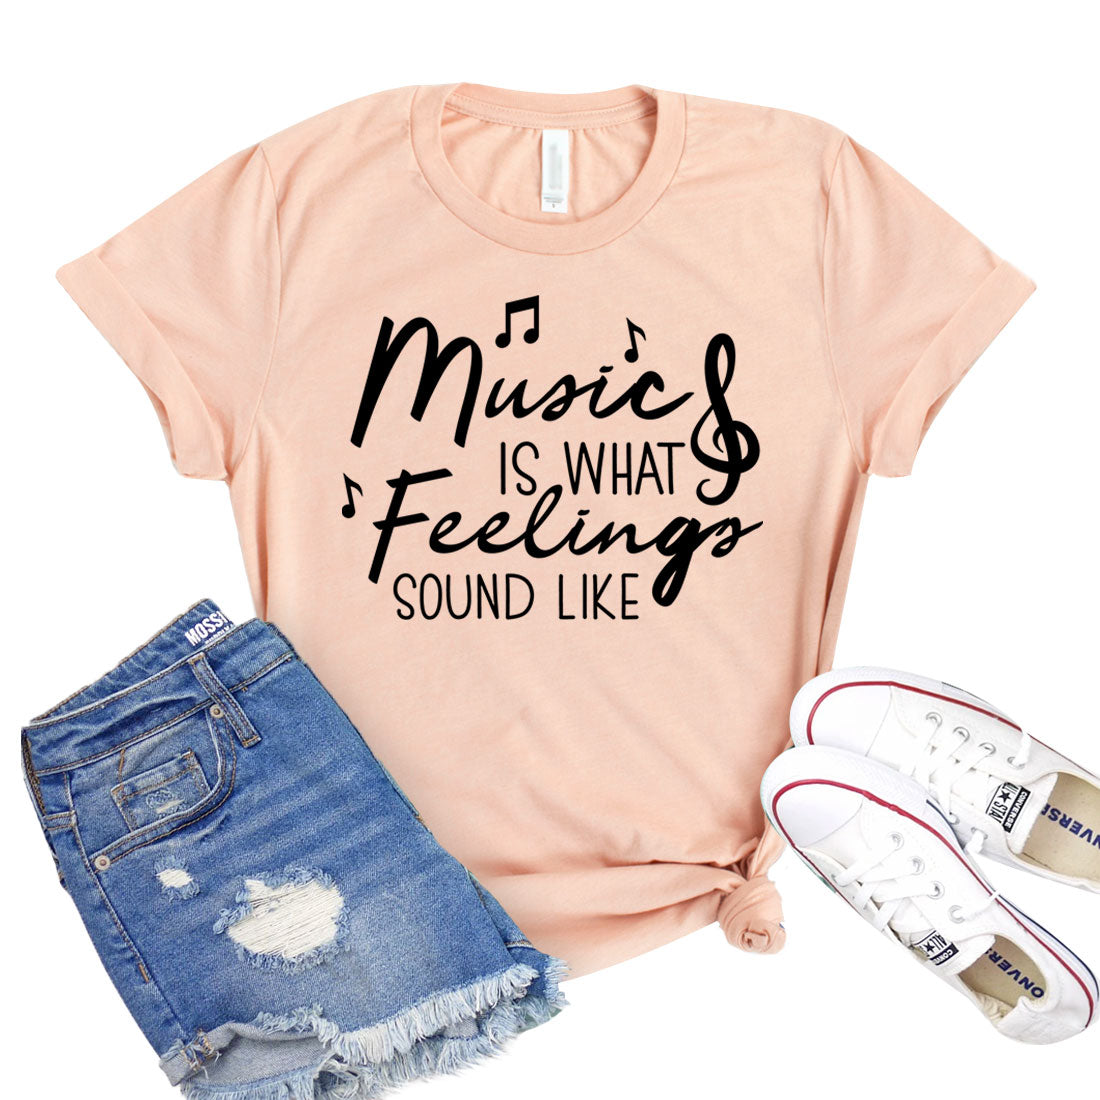 Music Is What Feelings Sound Like T-shirt